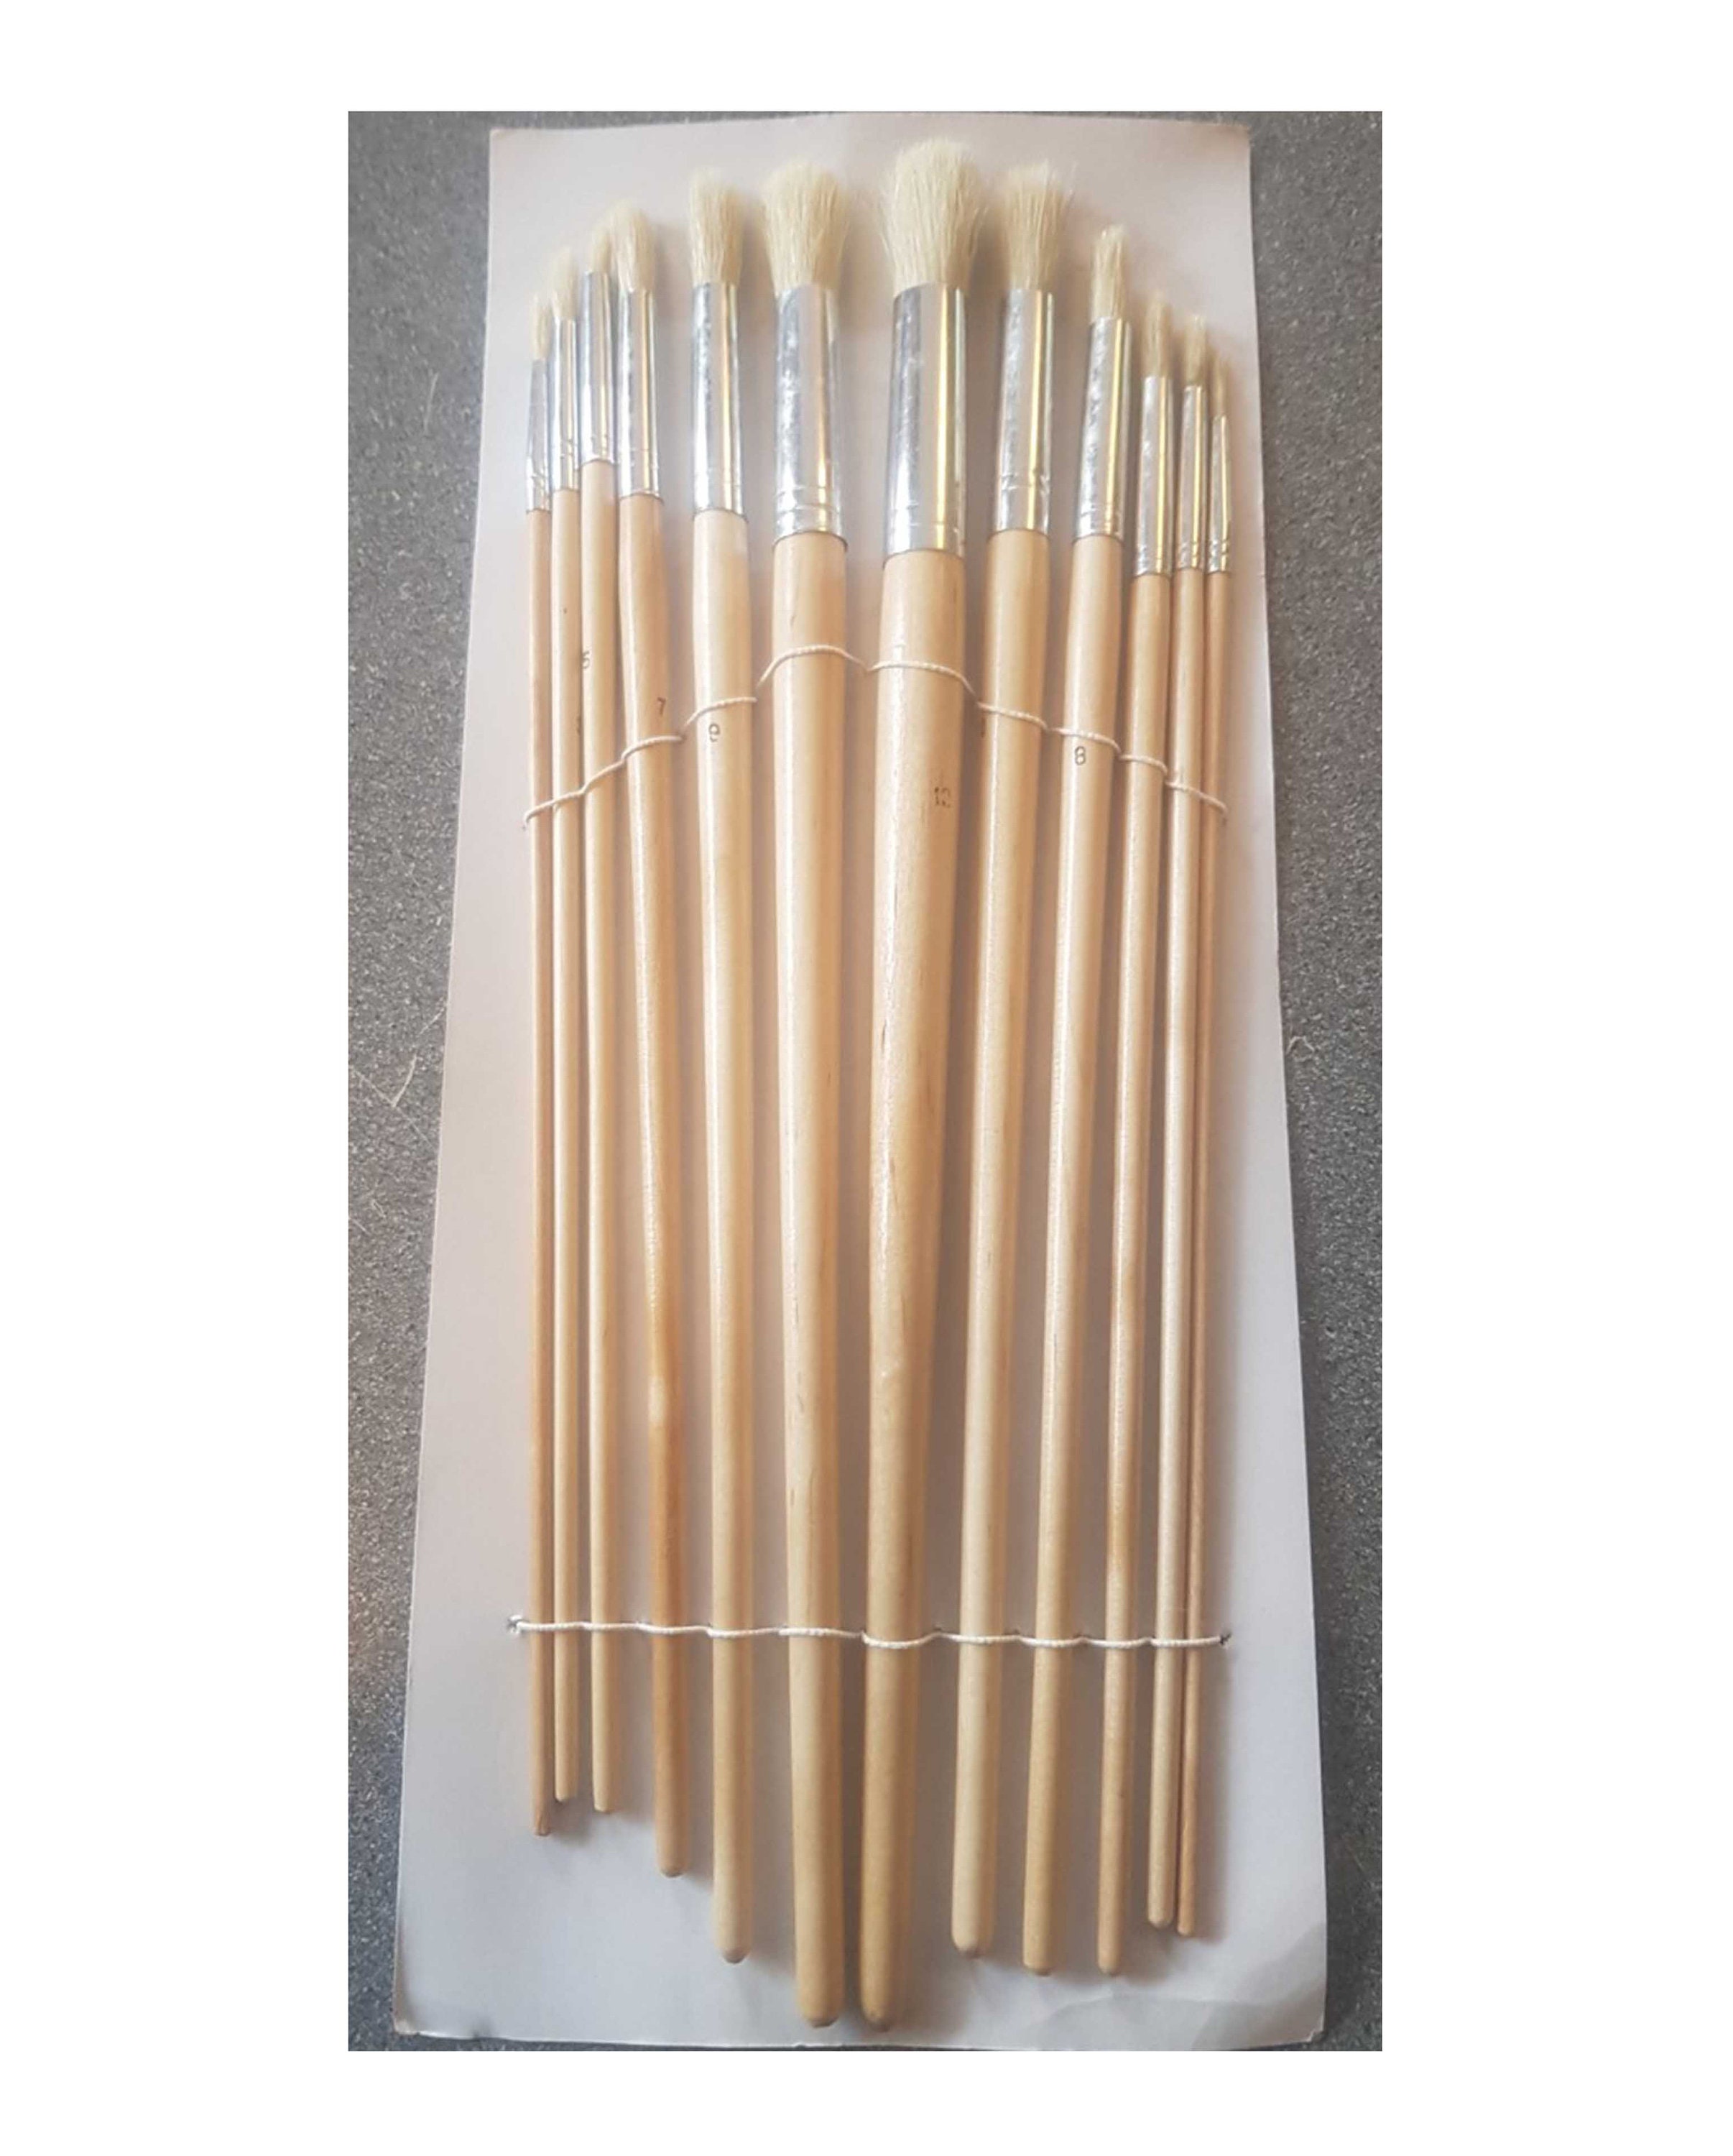 12PC LONG HANDLE WOODEN ROUND HEAD ARTIST PAINT BRUSH SETS Art Craft  Brushes NEW 5057502808165 